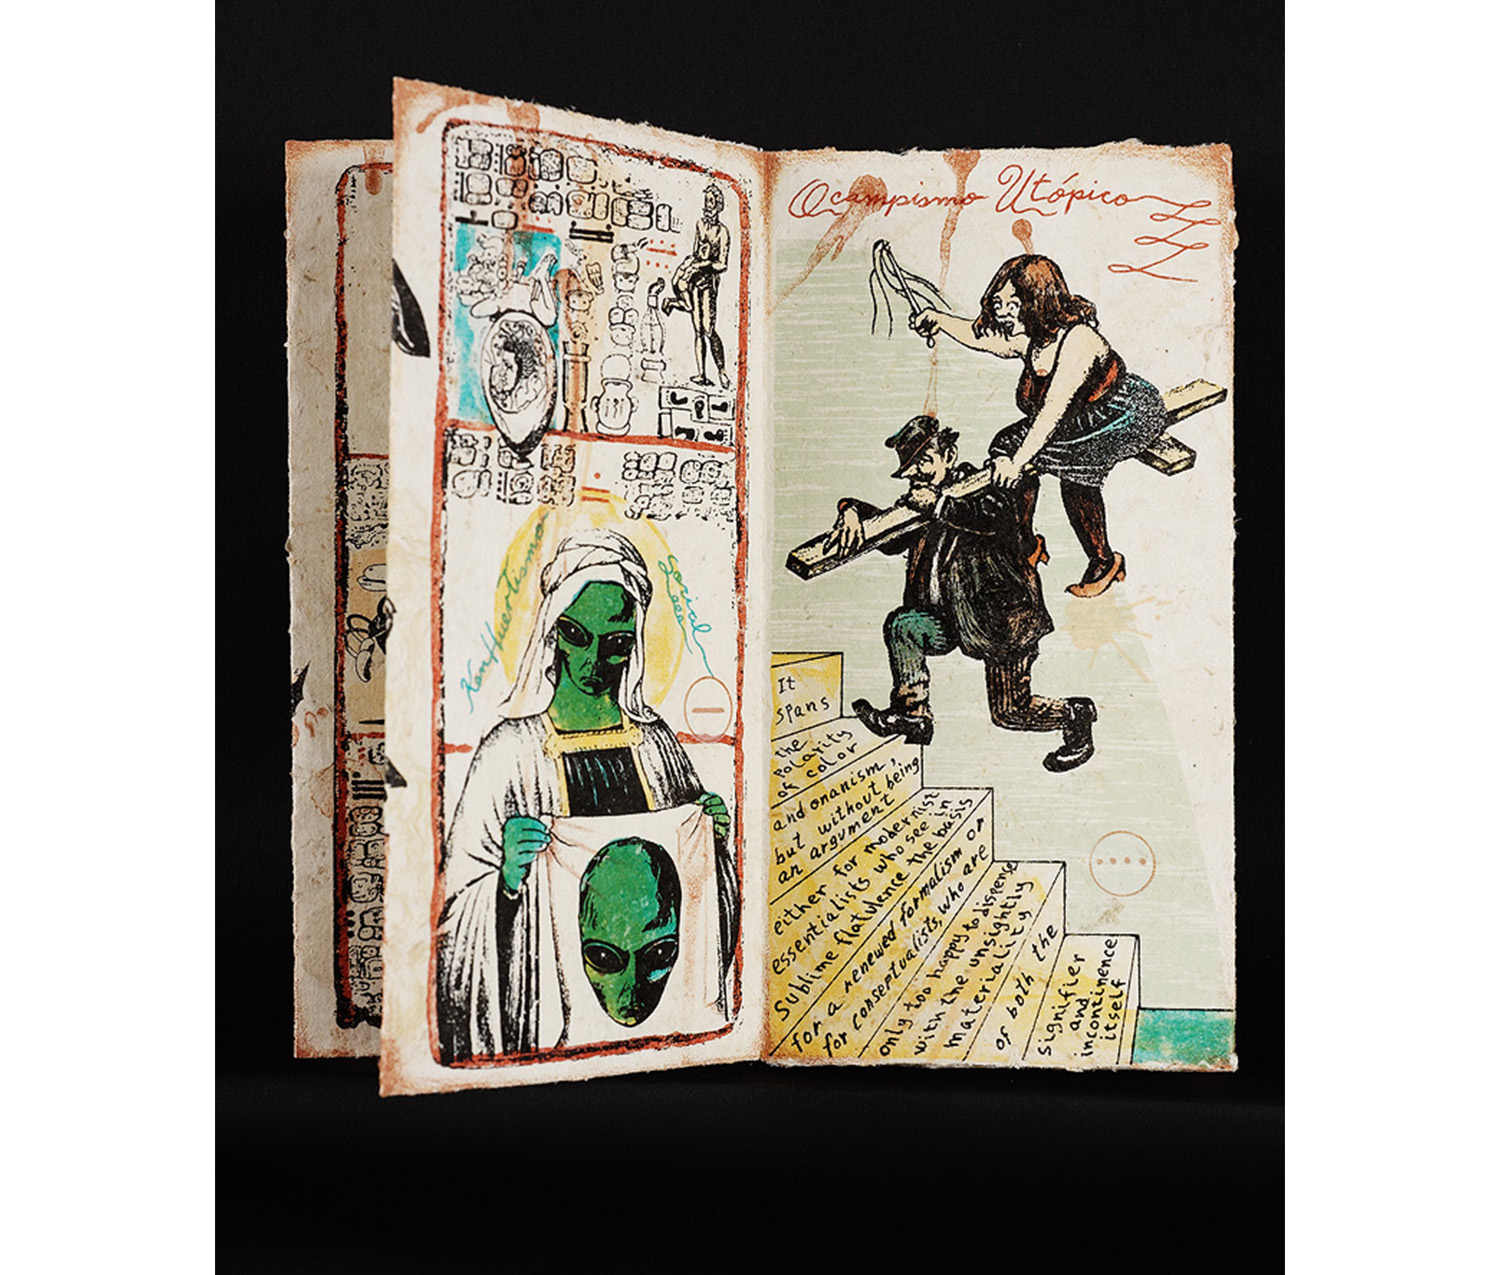 Open book. Left page: various drawings and symbols along the top; green alien wearing white robes and holding a piece of white fabric with its own face printed on it. Right page: man carrying a wooden cross over his shoulder, with a woman riding on it. The man balances on the edge of a set of yellow stairs with text written on them. 